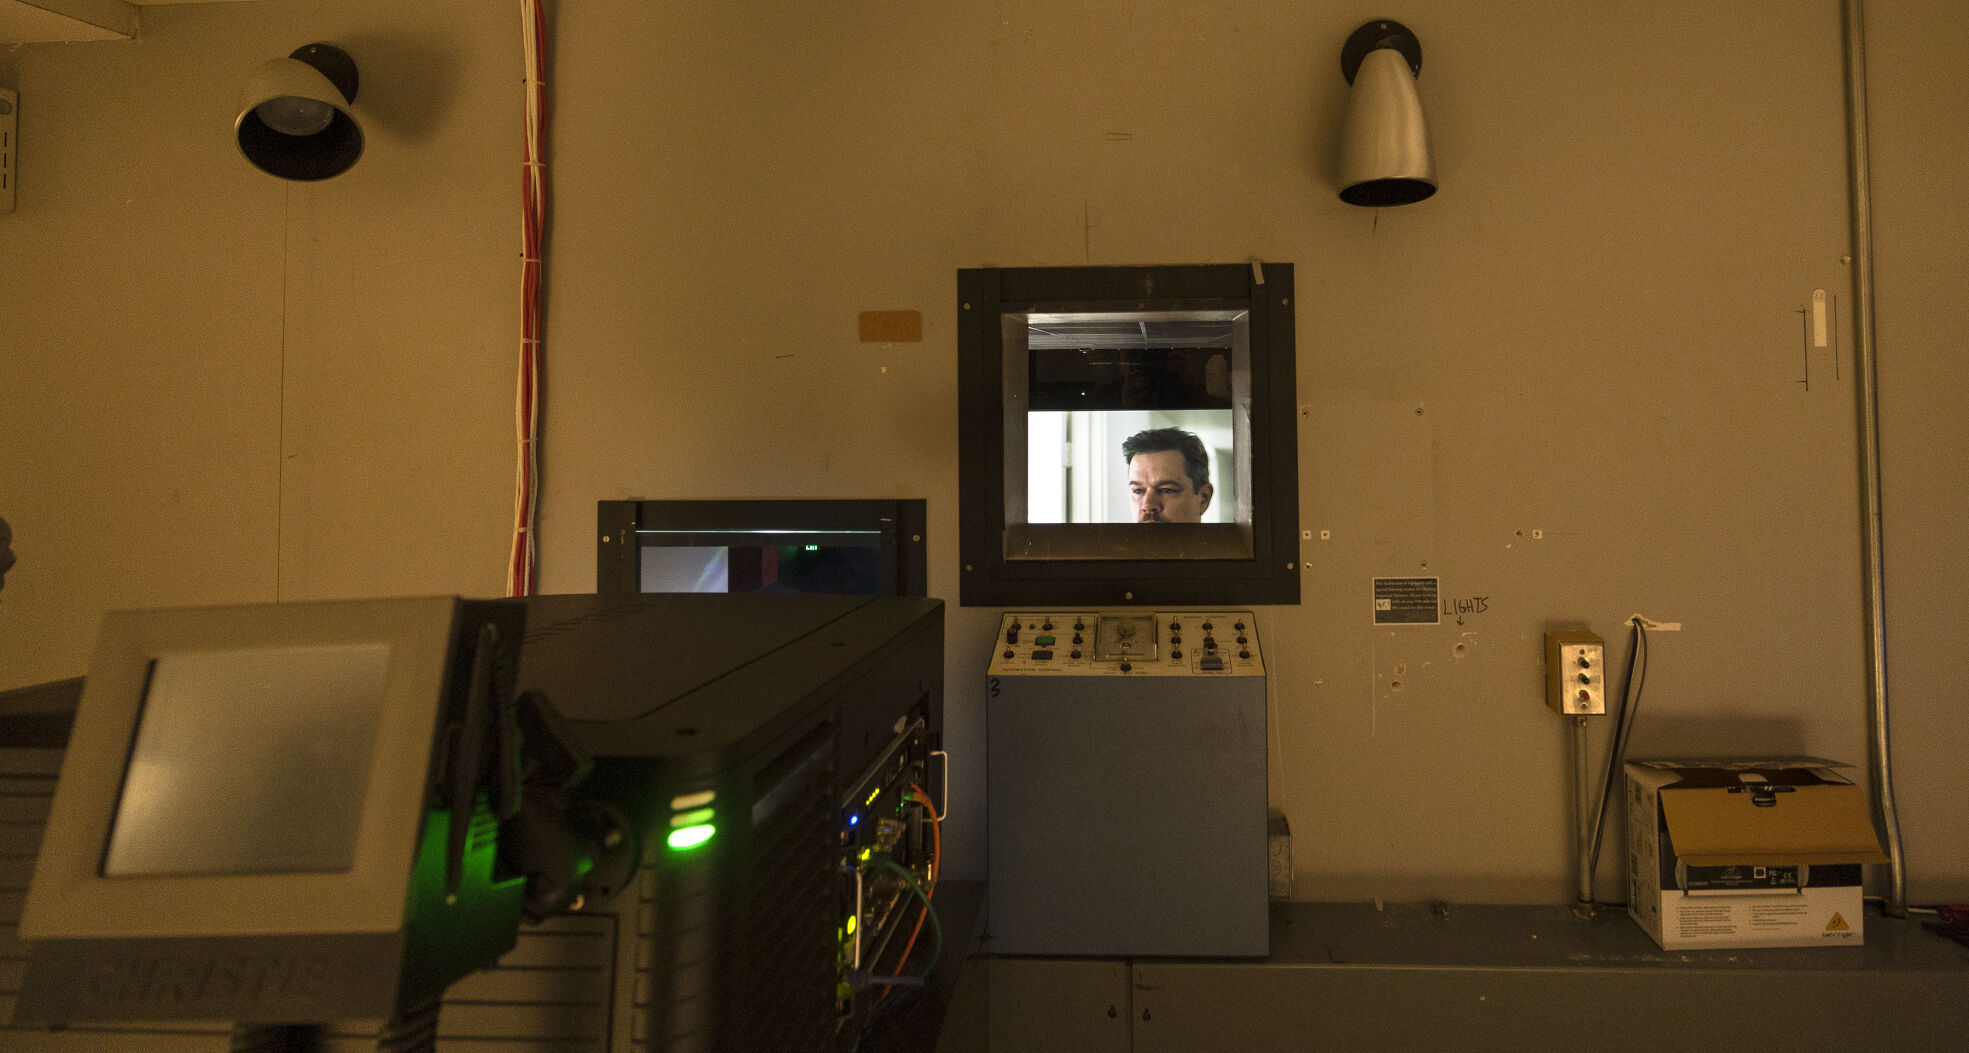 The projection room at Phoenix Theatres in Dubuque.    PHOTO CREDIT: Stephen Gassman
Telegraph Herald